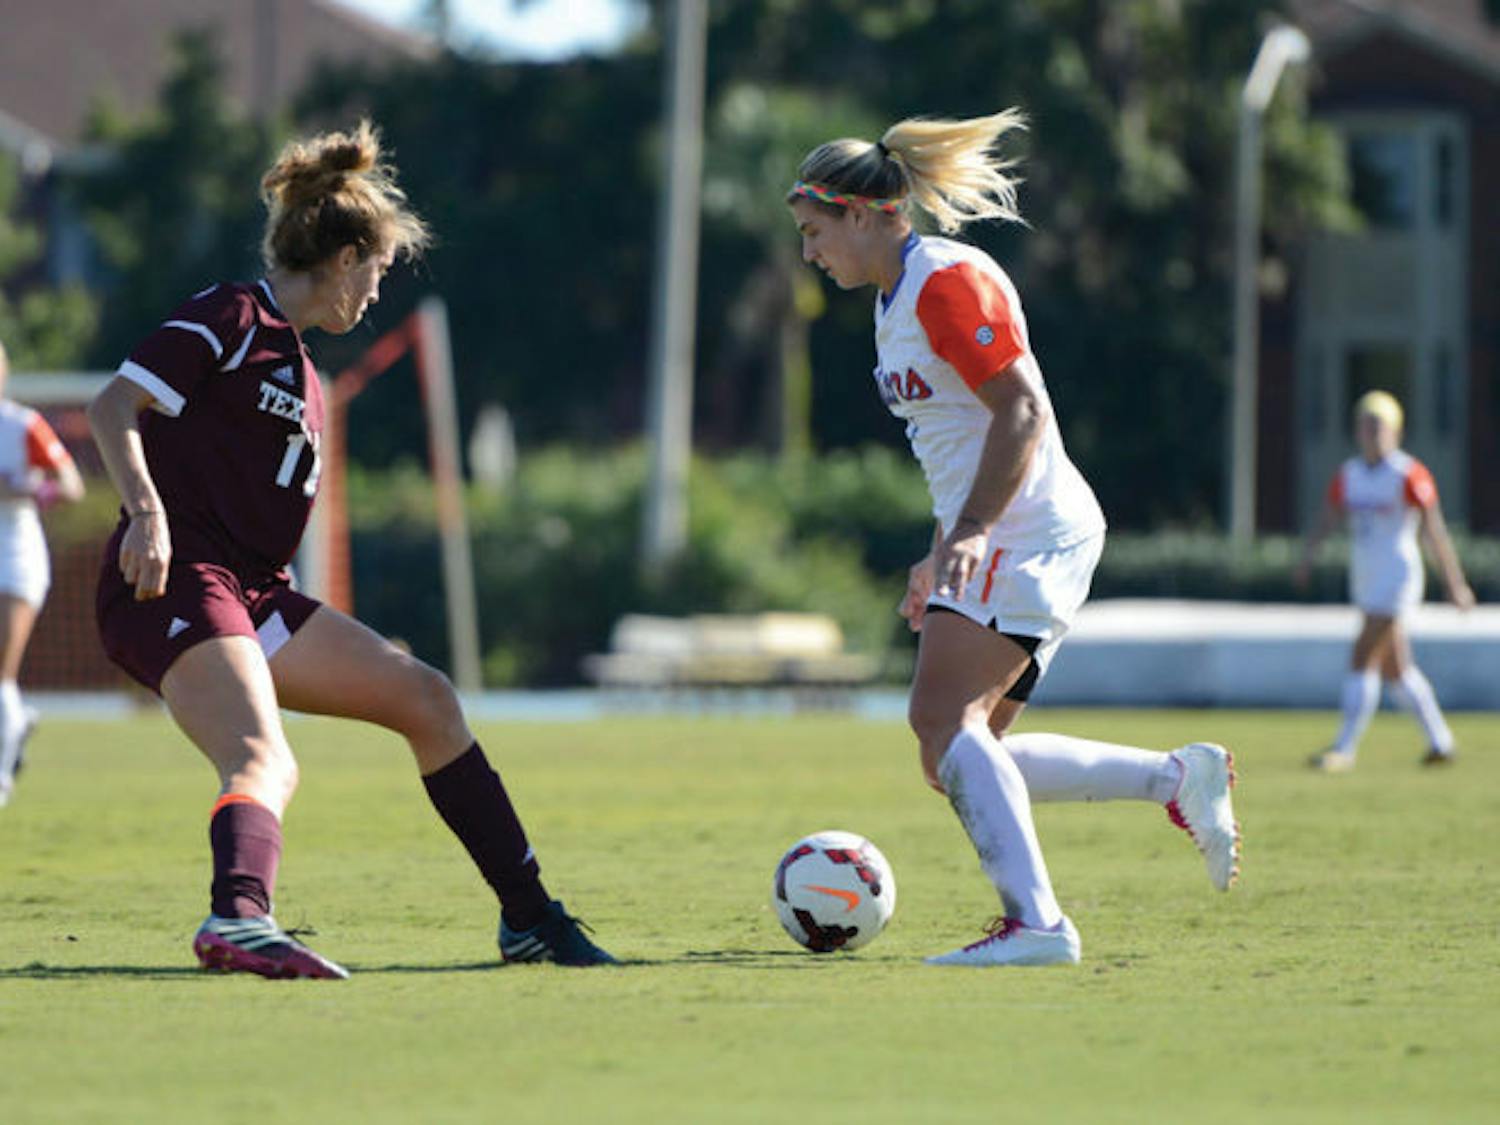 Savannah Jordan dribbles the ball during Florida’s 2-0 win against Texas A&amp;M on Oct. 27 in Gainesville. Jordan scored the game-winning goal in Florida's 1-0 win against Arkansas on Wednesday.